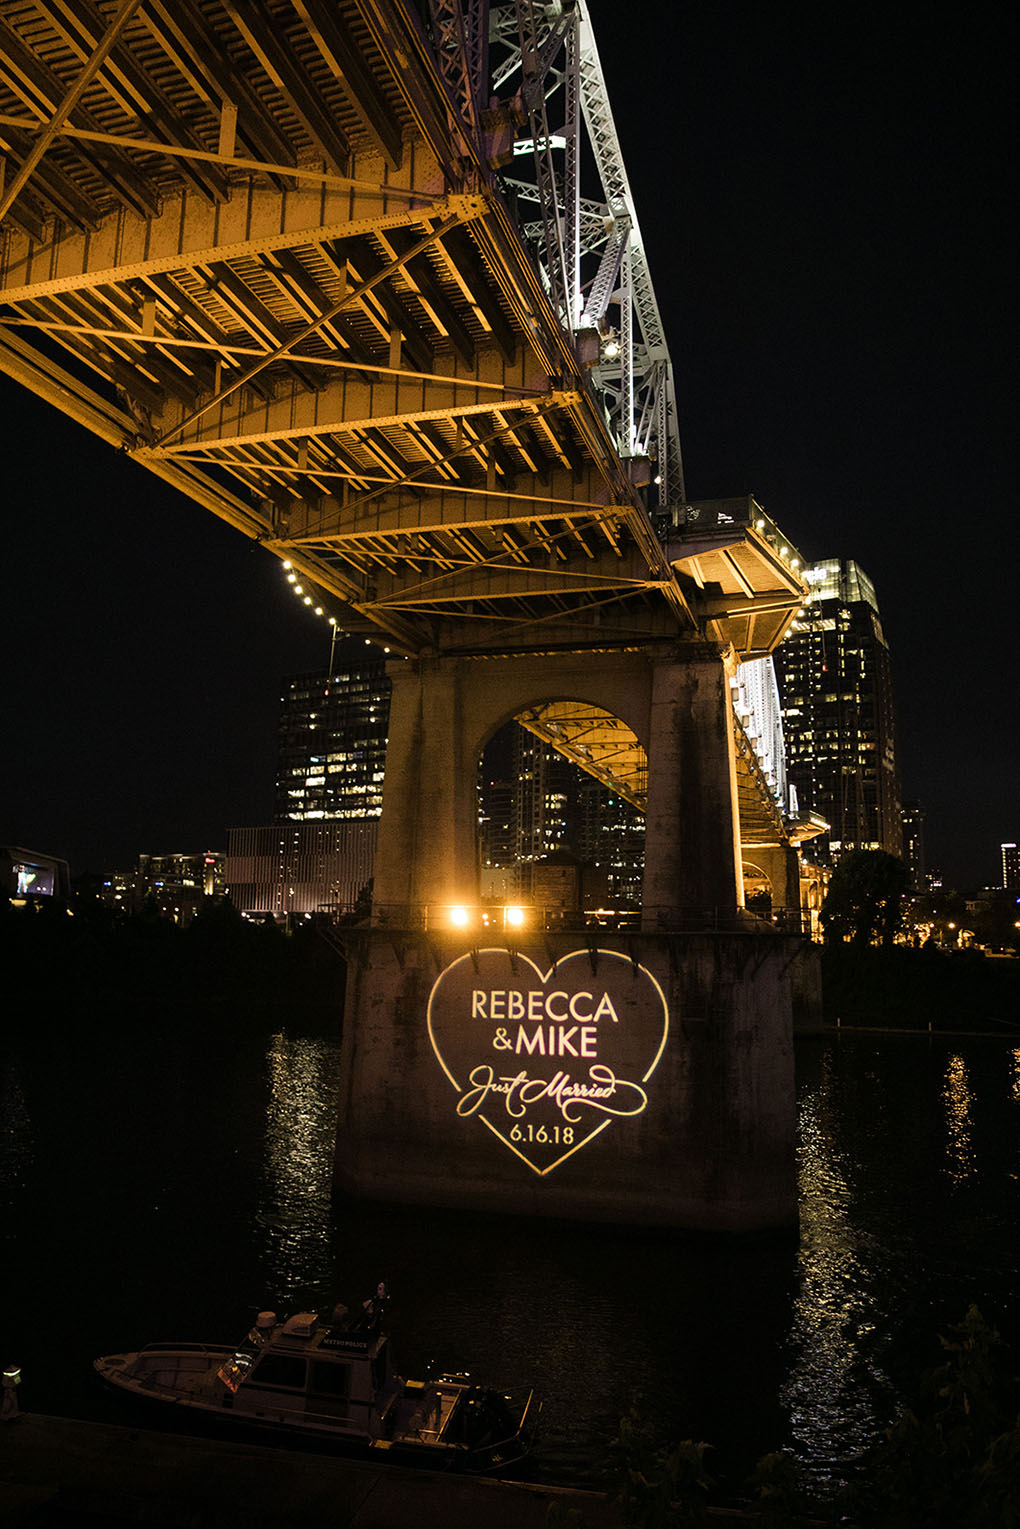 Becca and Mike's Gobo on the Pedestrian Bridge